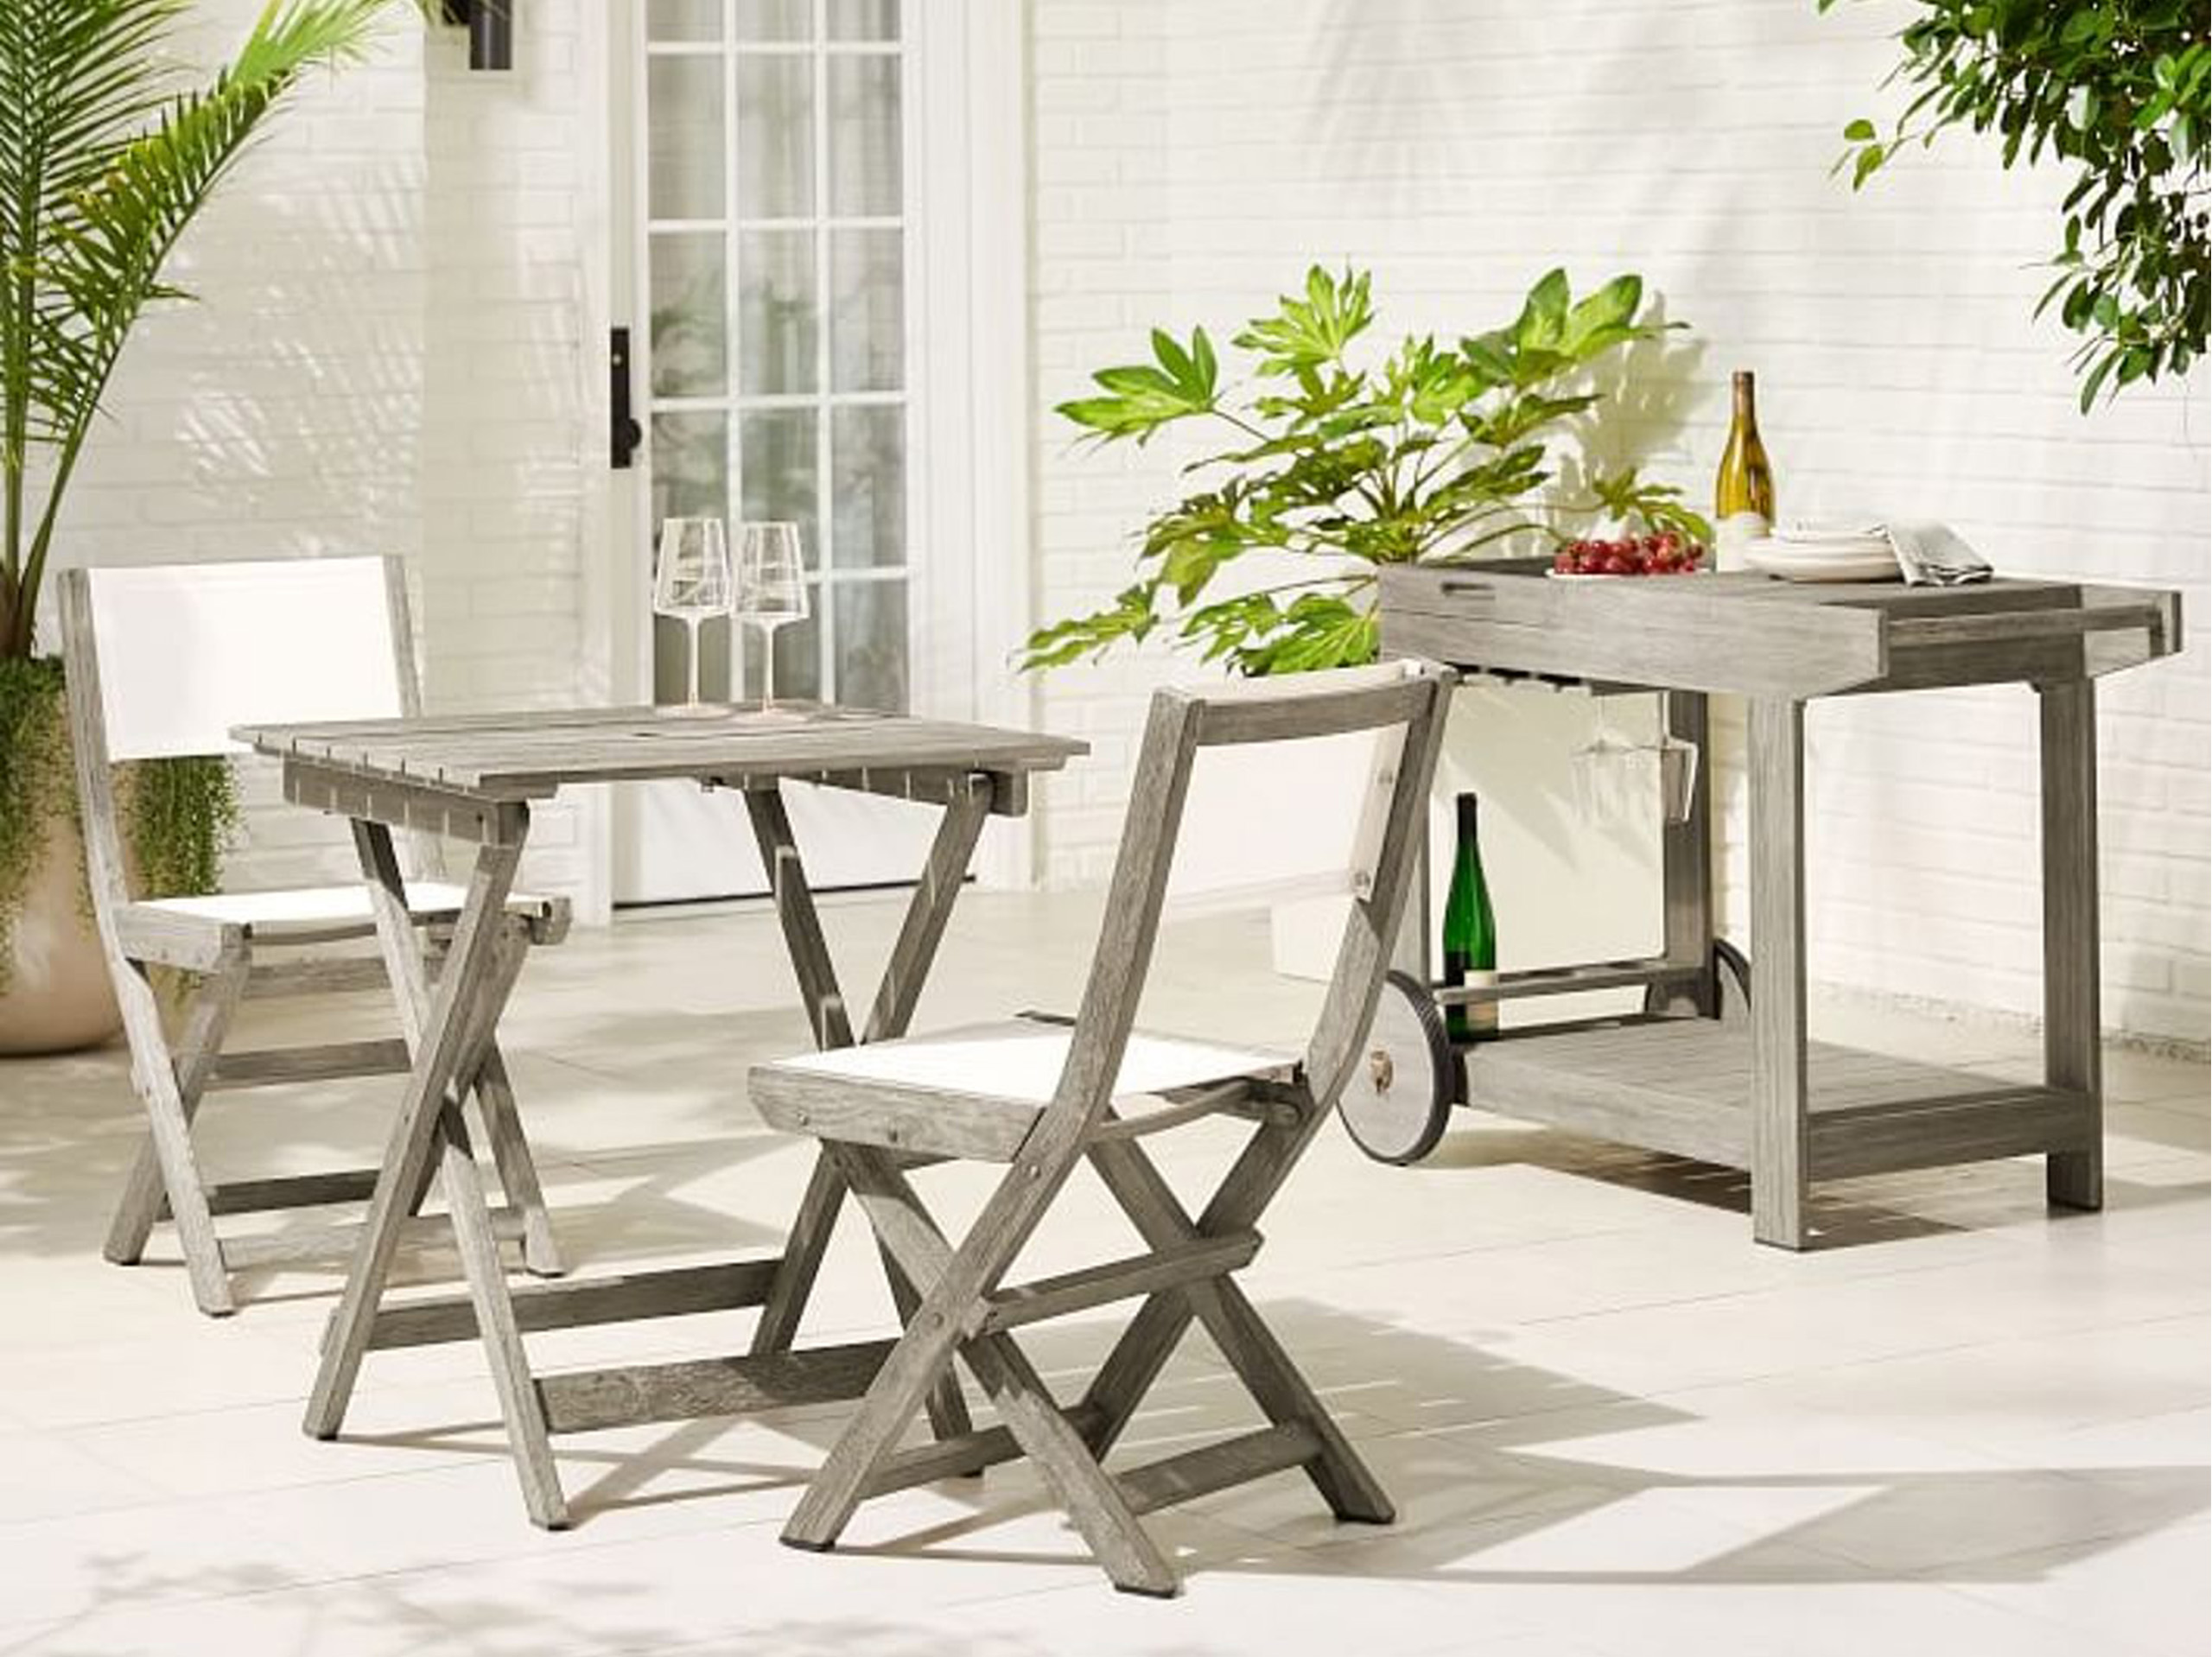 Portside Outdoor Folding Bistro Chairs and Table